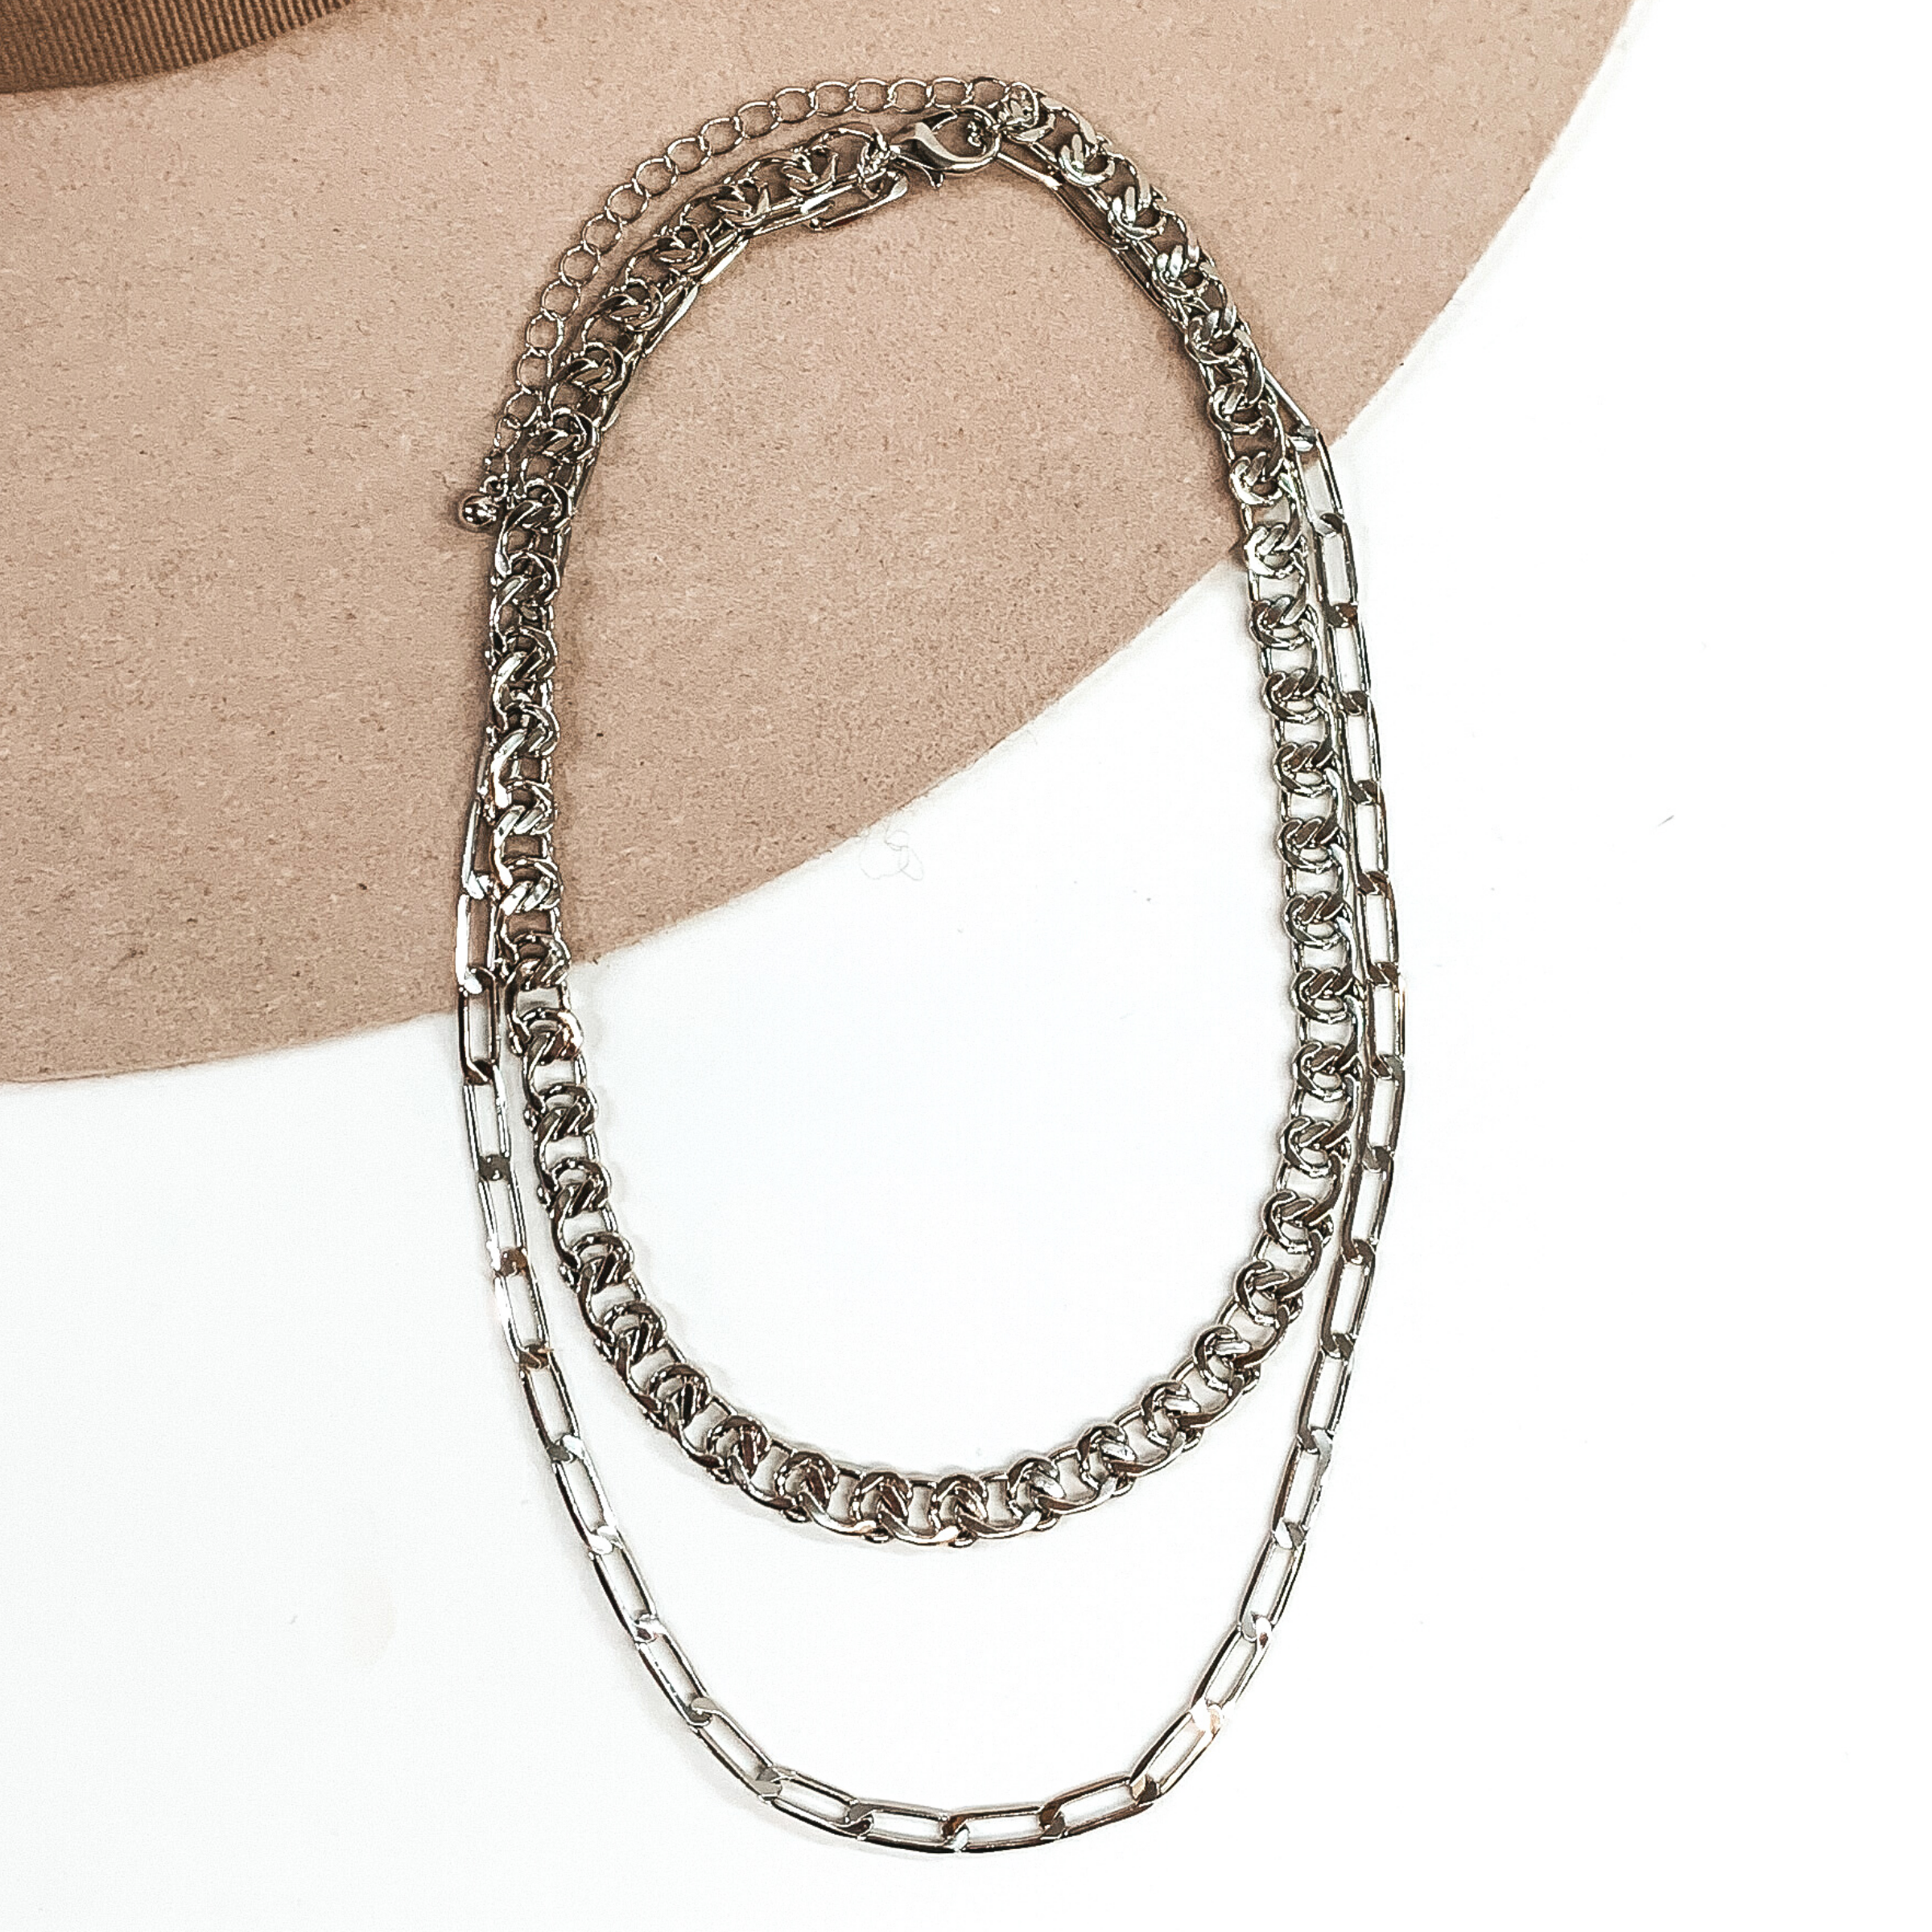 This is a silver double layer, adjustable, chained necklace. There are two different types of chains; a thick curb chain and a thin paperclip chain. this necklace is pictured on a white and beige background. 